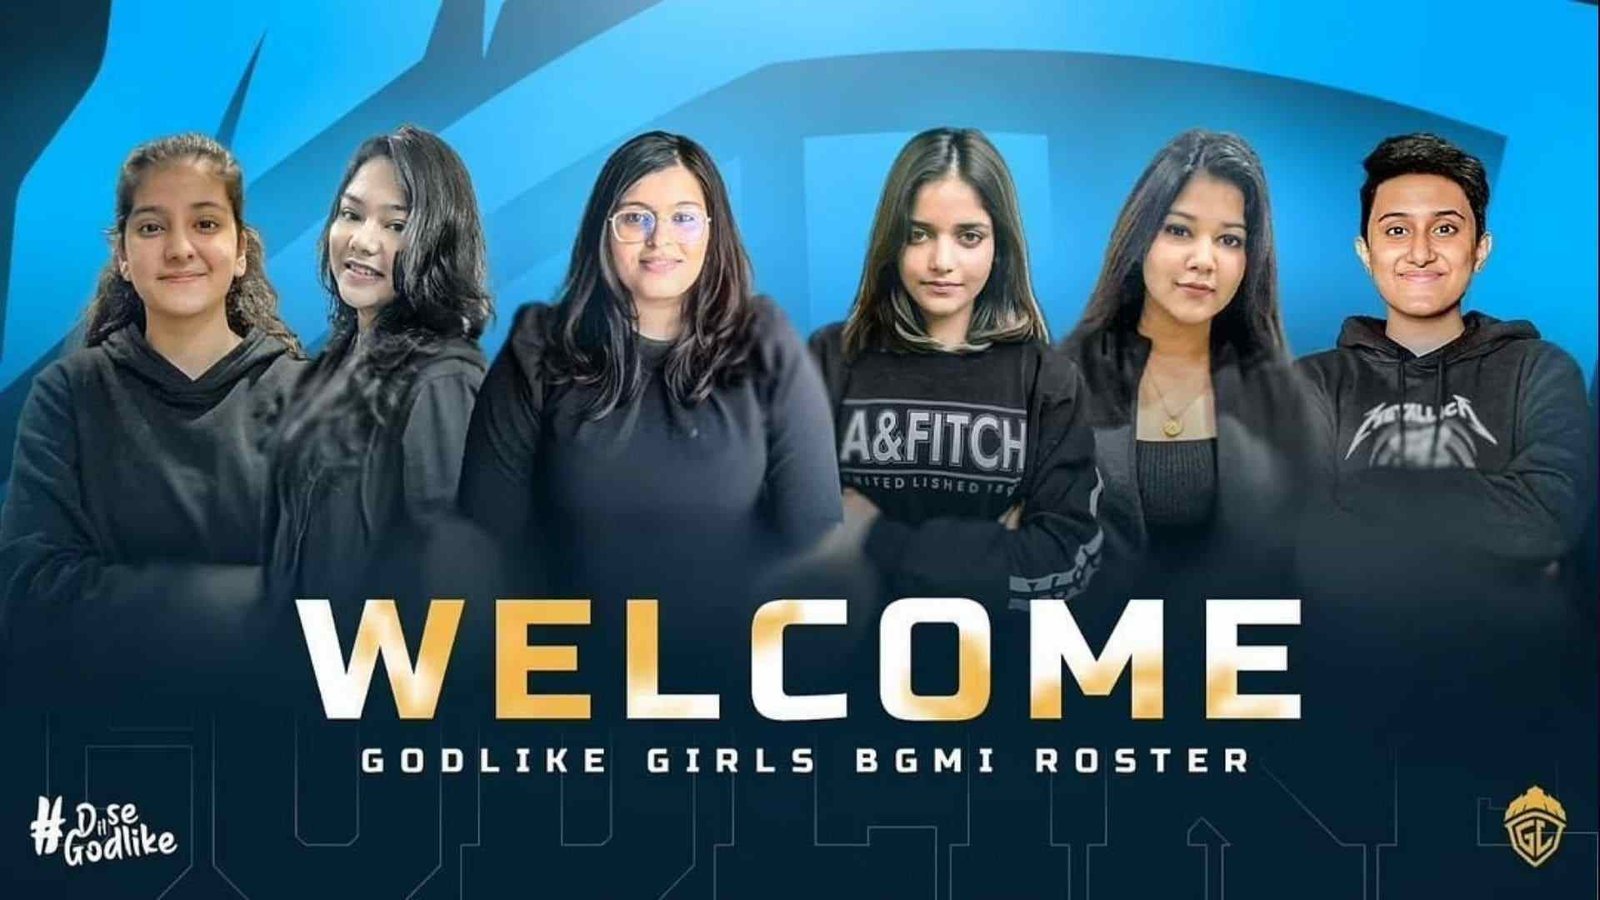 BGMI Godlike Introduces The All Girls BGMI Roster